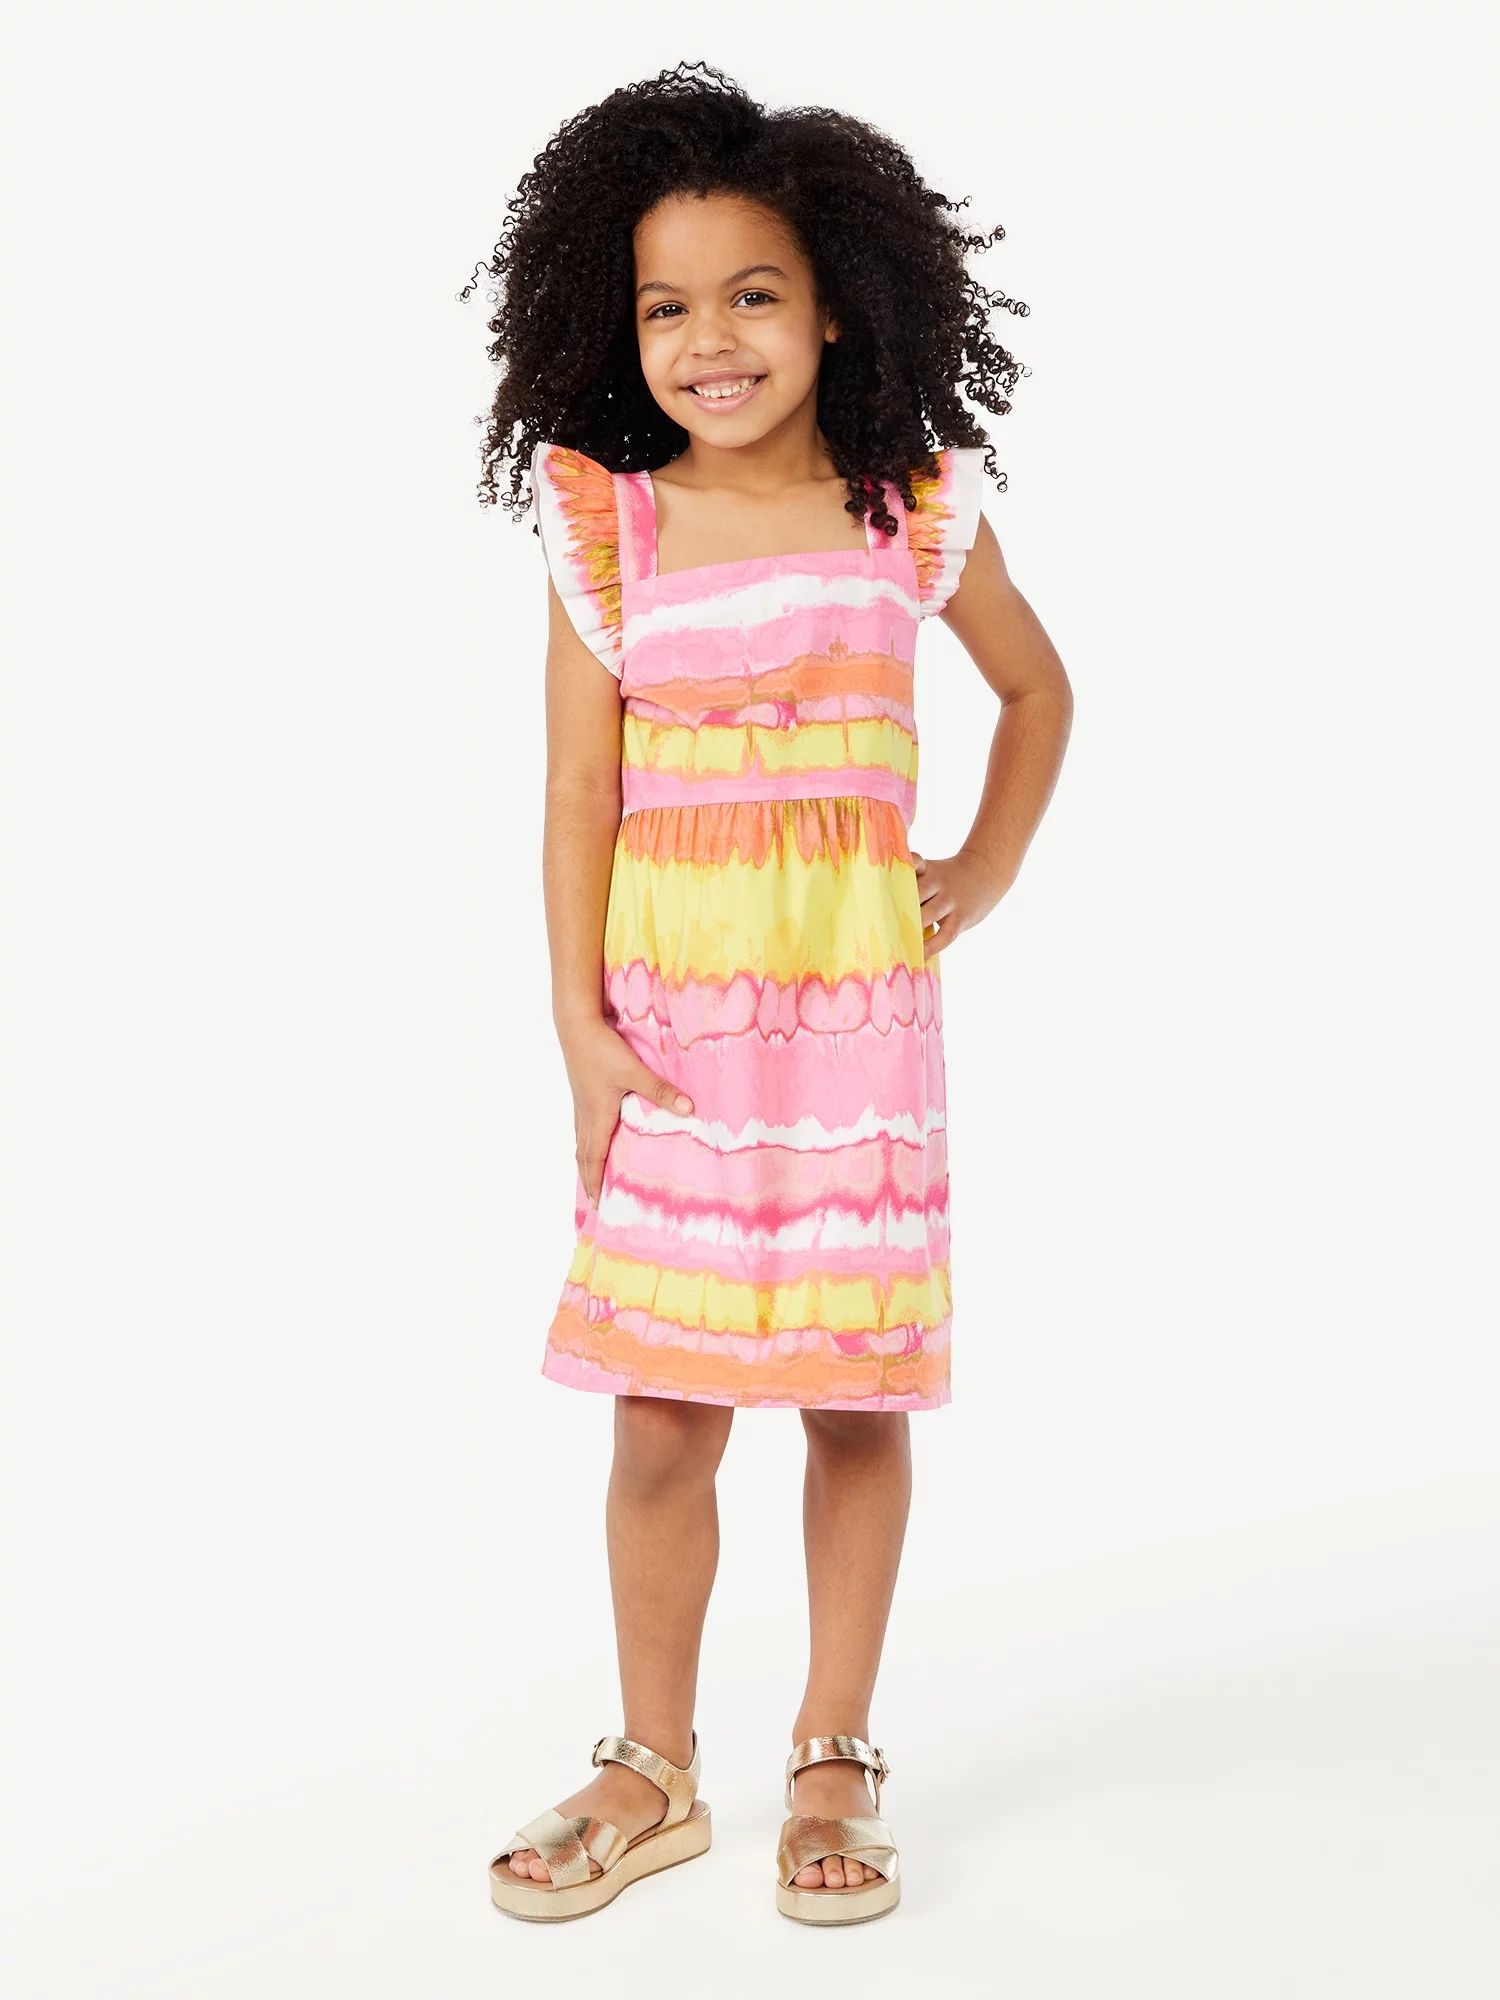 Scoop Girls Mommy & Me Print Dress with Flutter Sleeves, Sizes 4-12 | Walmart (US)